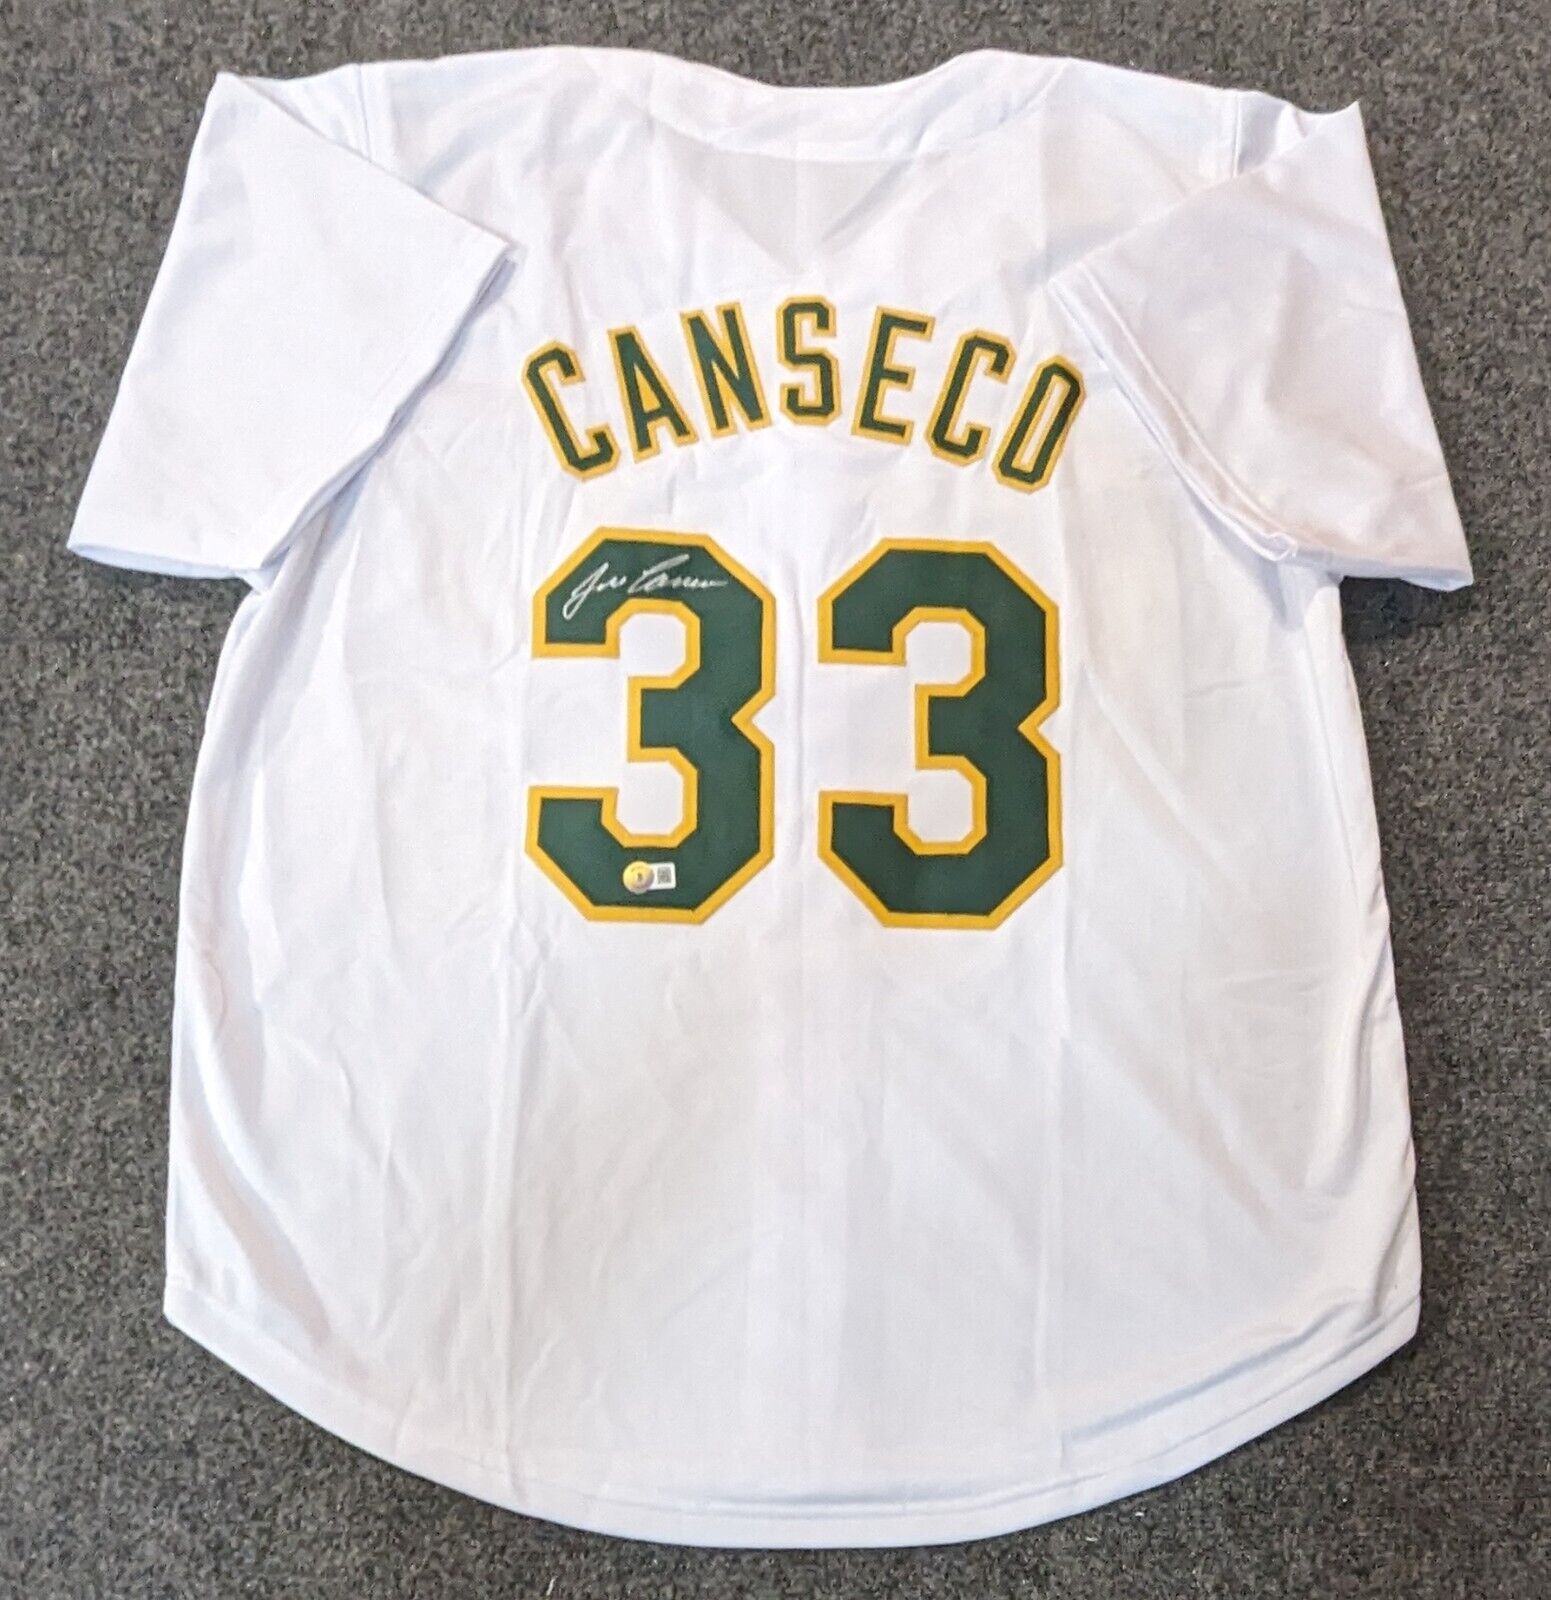 Jose Canseco Oakland Athletics Autographed Yellow Mitchell & Ness Replica  Jersey with 1989 WS Champs Inscription